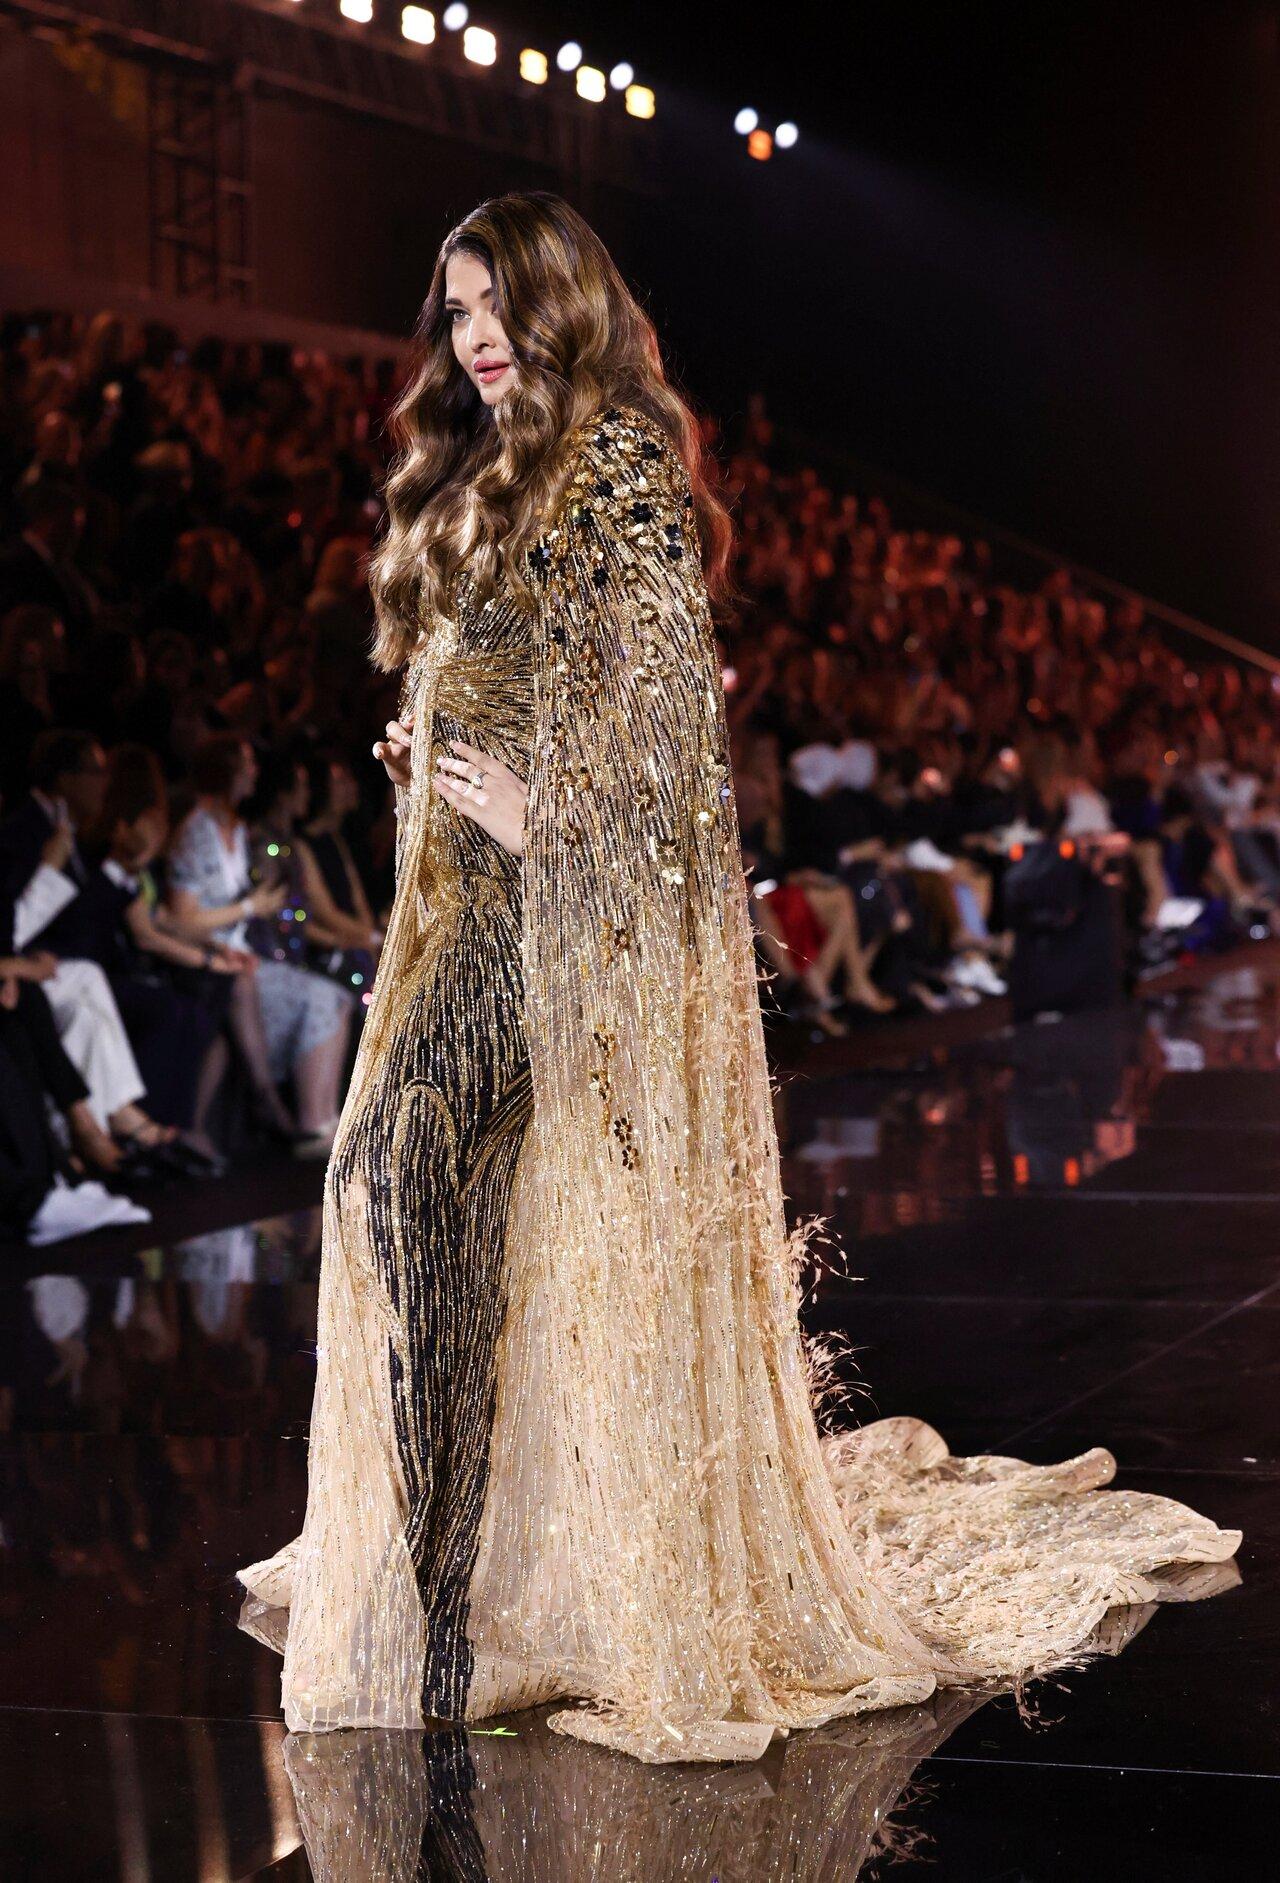 Aishwarya's golden gown features sparkling gold sequin embellishments, beaded embroidery, a bodycon silhouette highlighting her curves, a gathered design on the front, a see-through cape attached on the back, and a floor-sweeping length forming a train